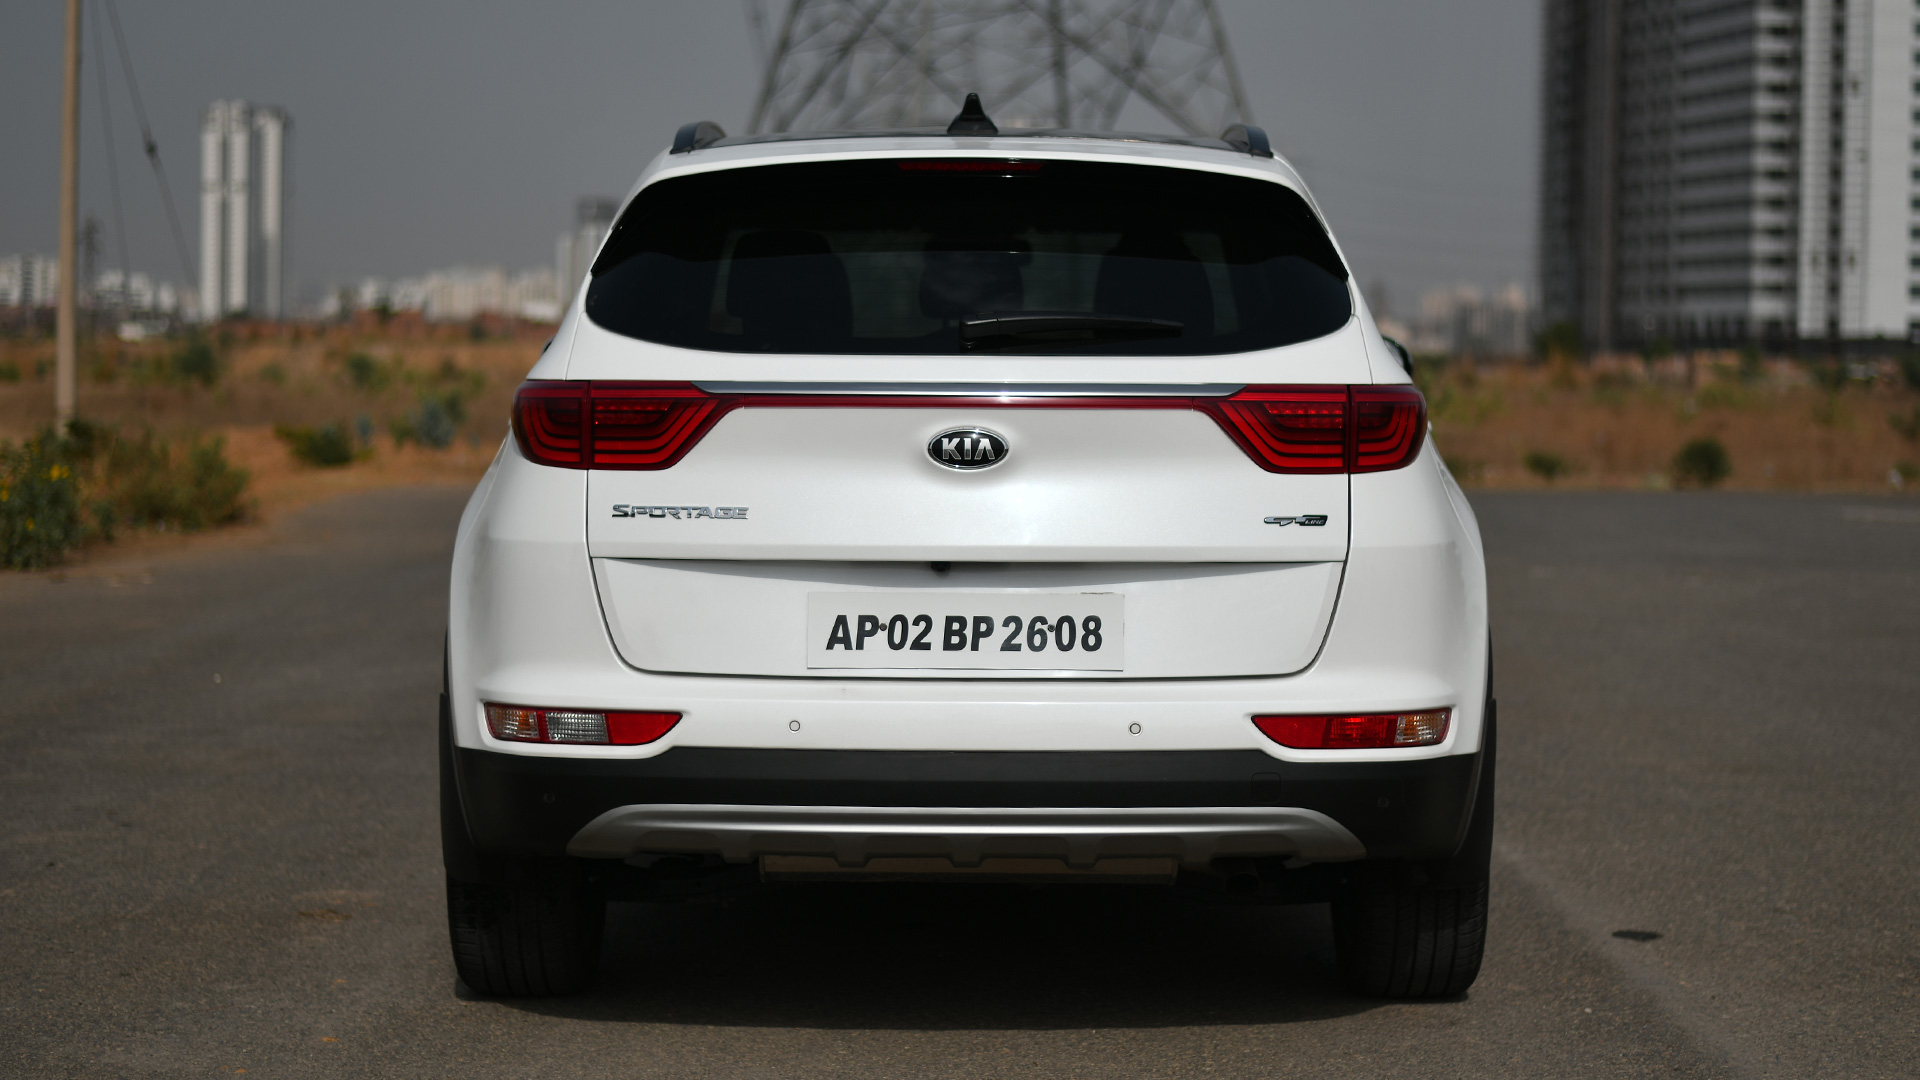 Kia Sportage 2018 - Price in India, Mileage, Reviews, Colours,  Specification, Images - Overdrive